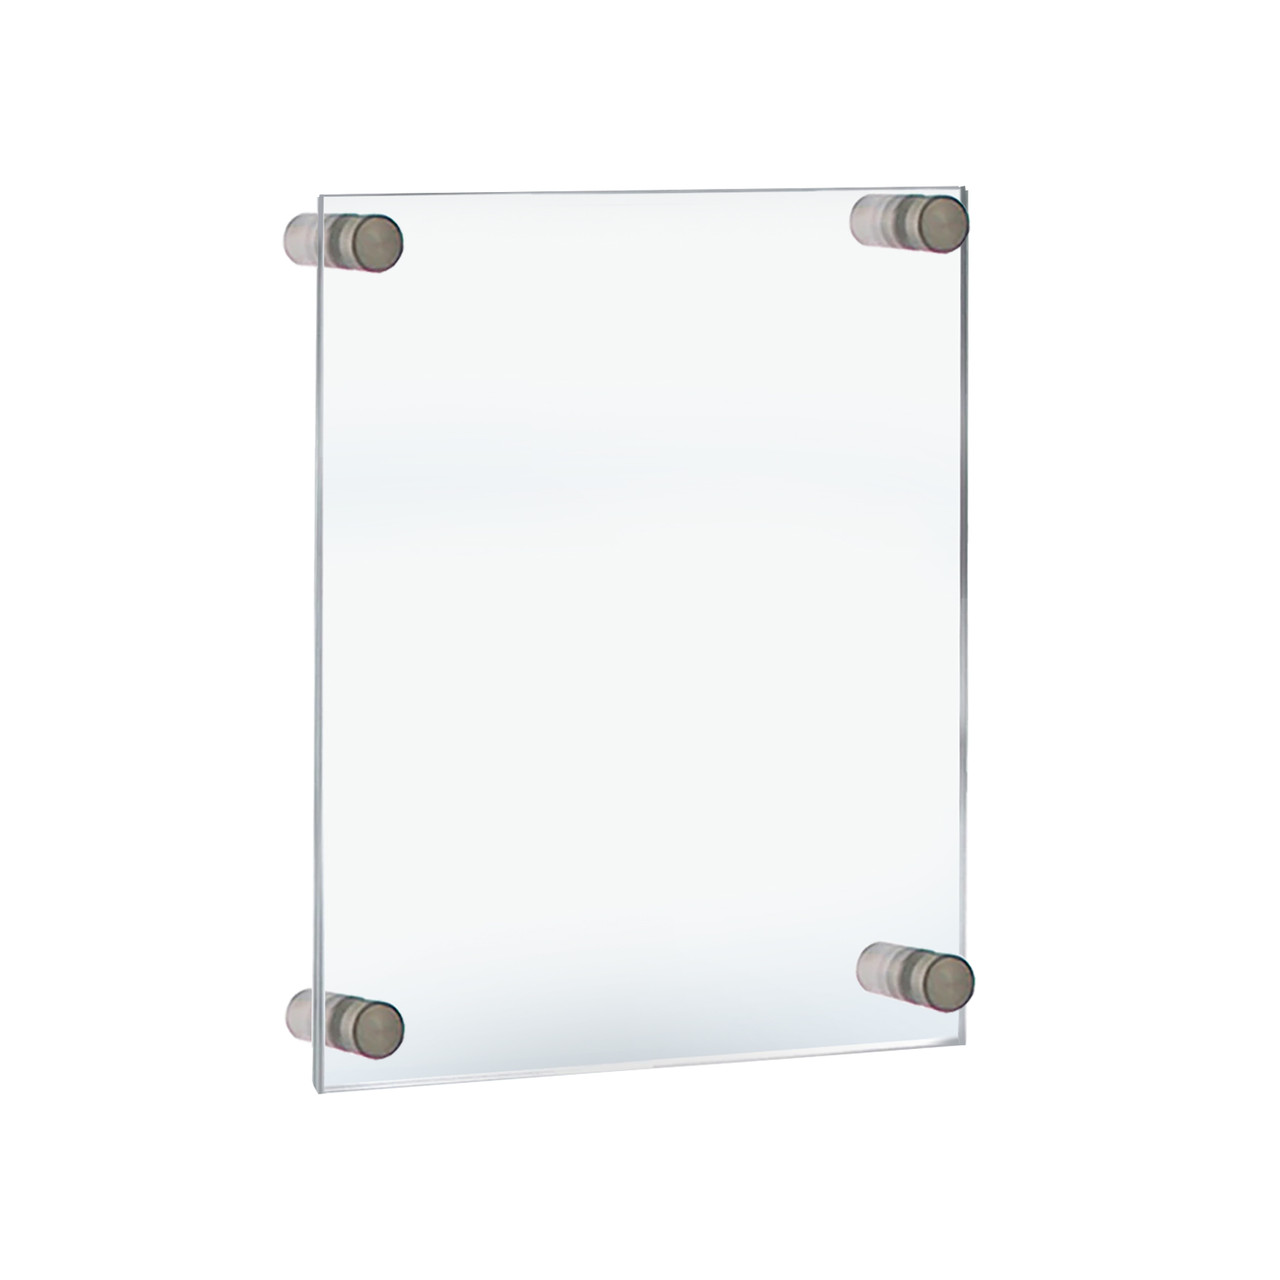 Azar Displays 11 in. x 8.5 in. Wall Frame with Magnetic Strip